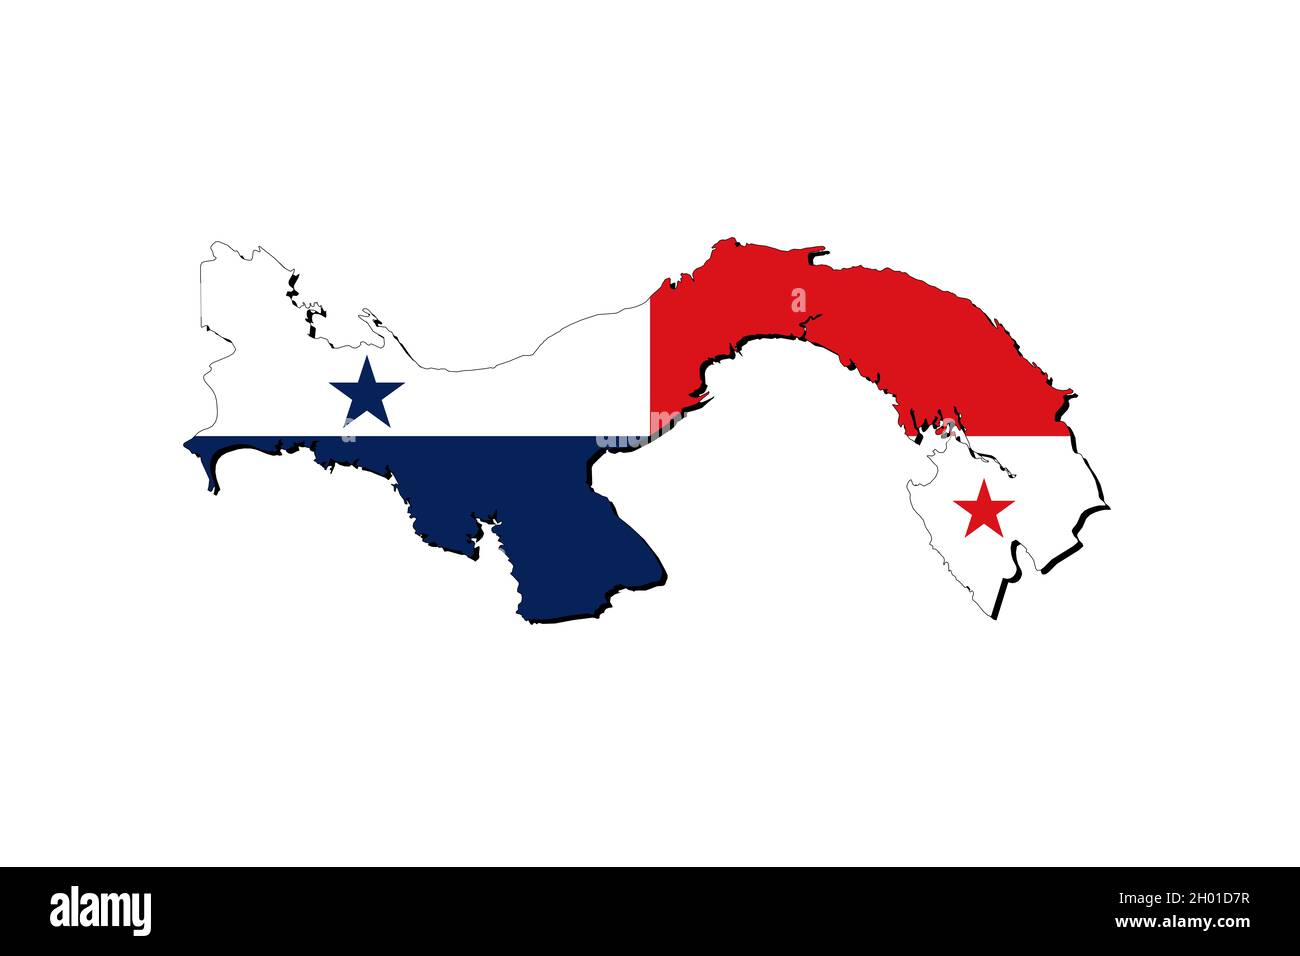 Outline map of Panama with the national flag superimposed over the country. 3D graphics casting a shadow on the white background Stock Photo